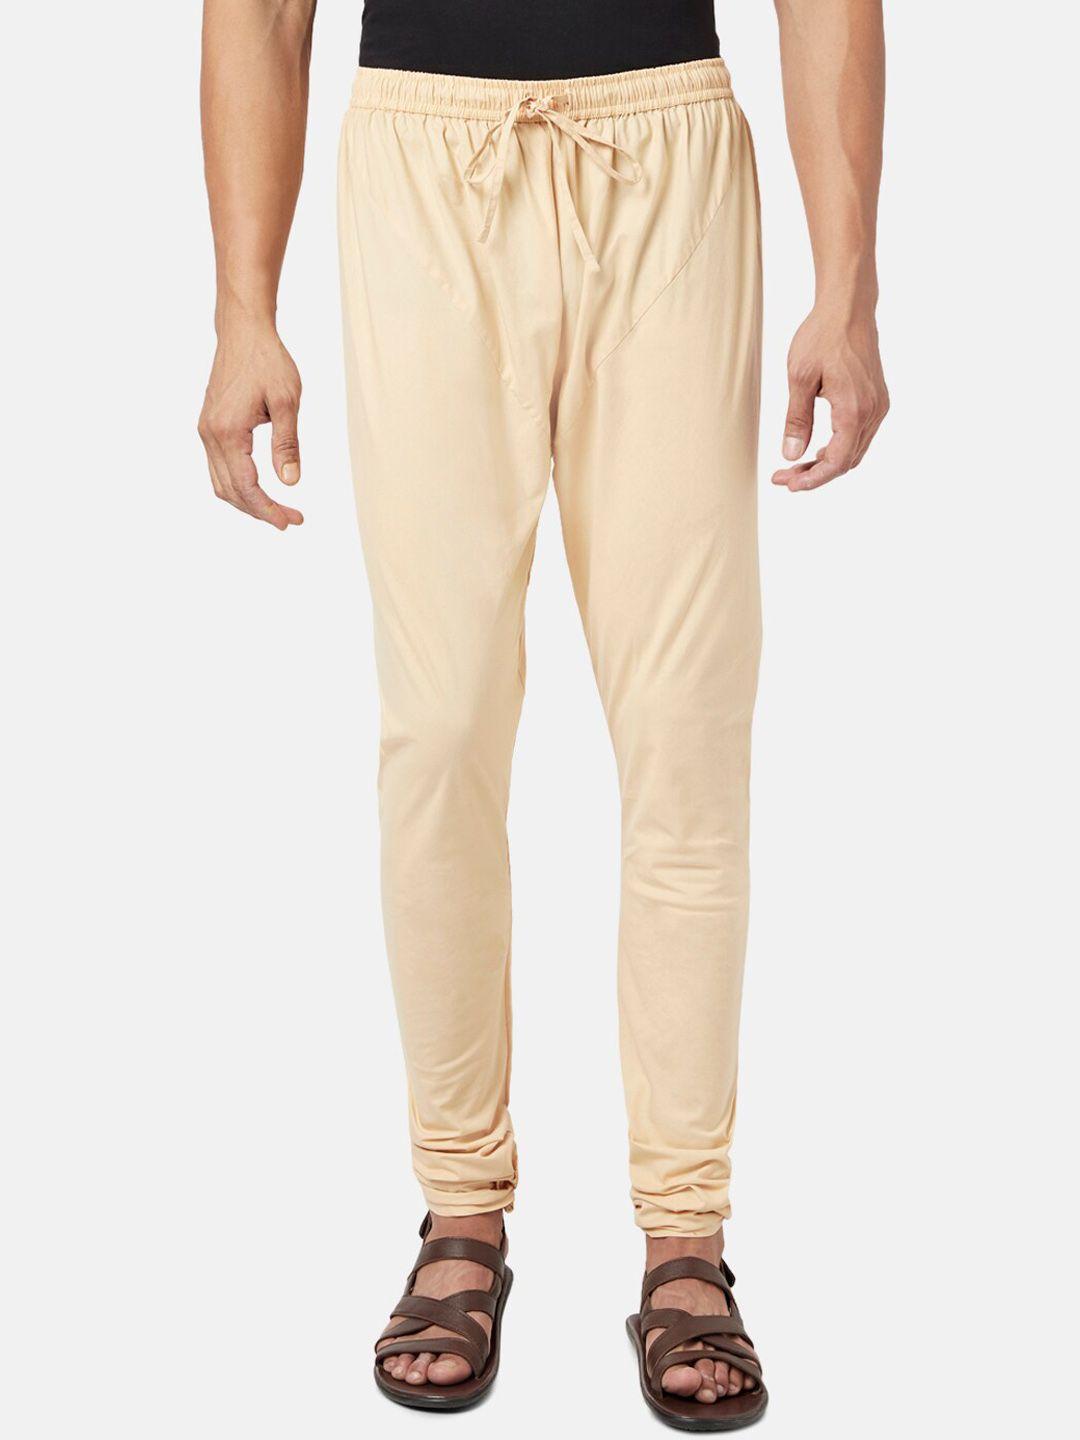 indus route by pantaloons men straight-fit cotton churidar